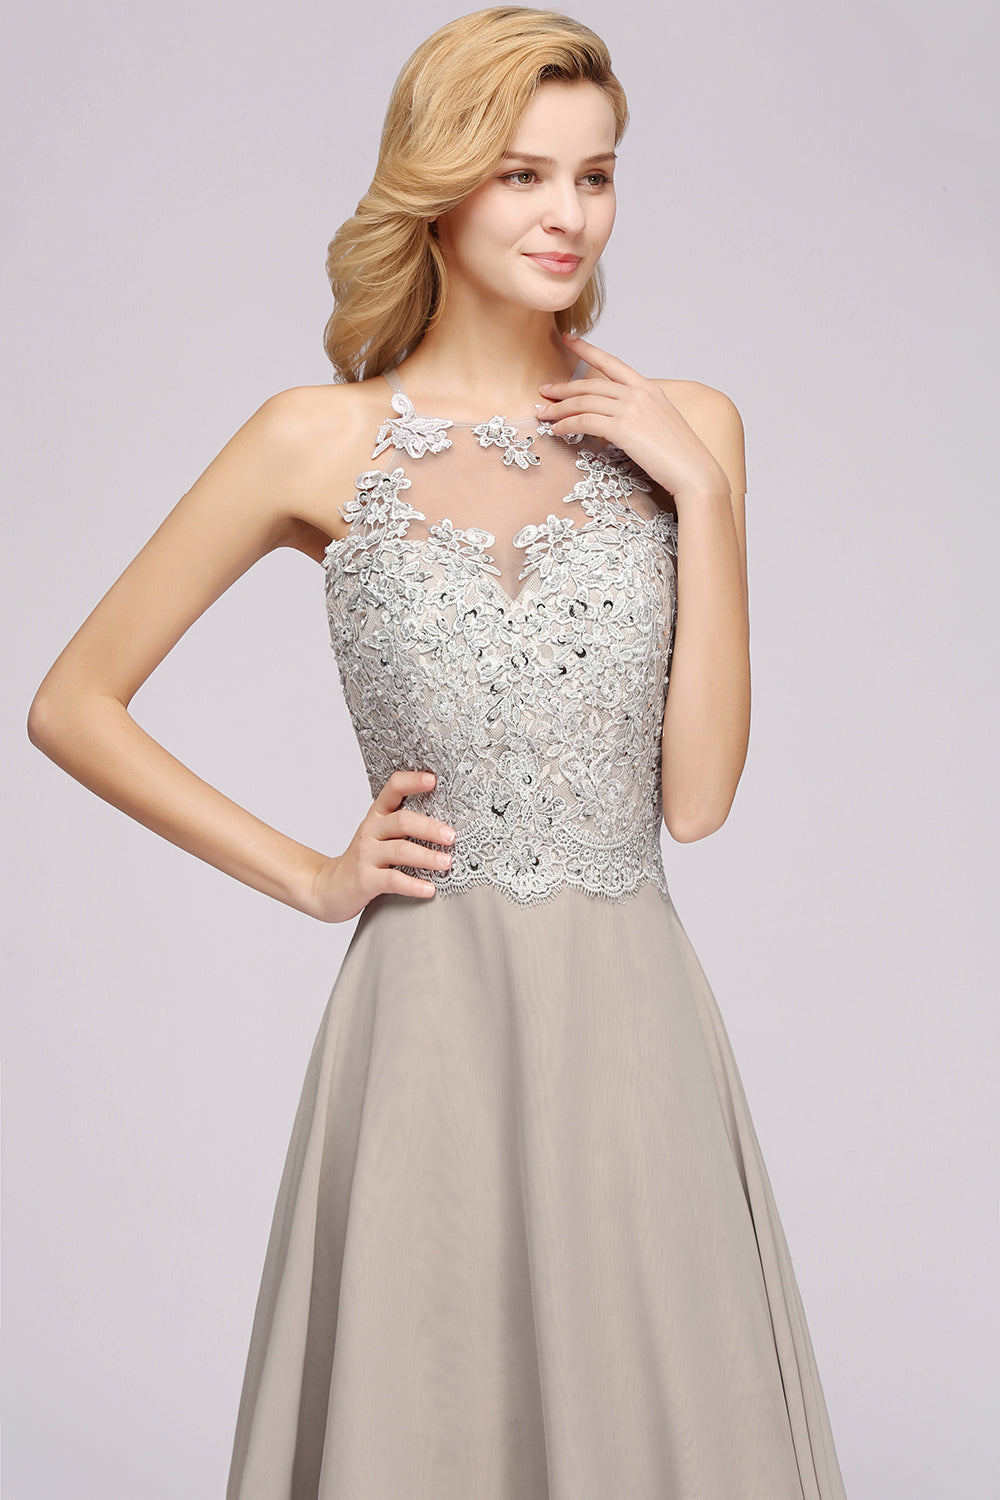 Exquisite Sleeveless Slit Lace Affordable Bridesmaid Dresses with Beadings